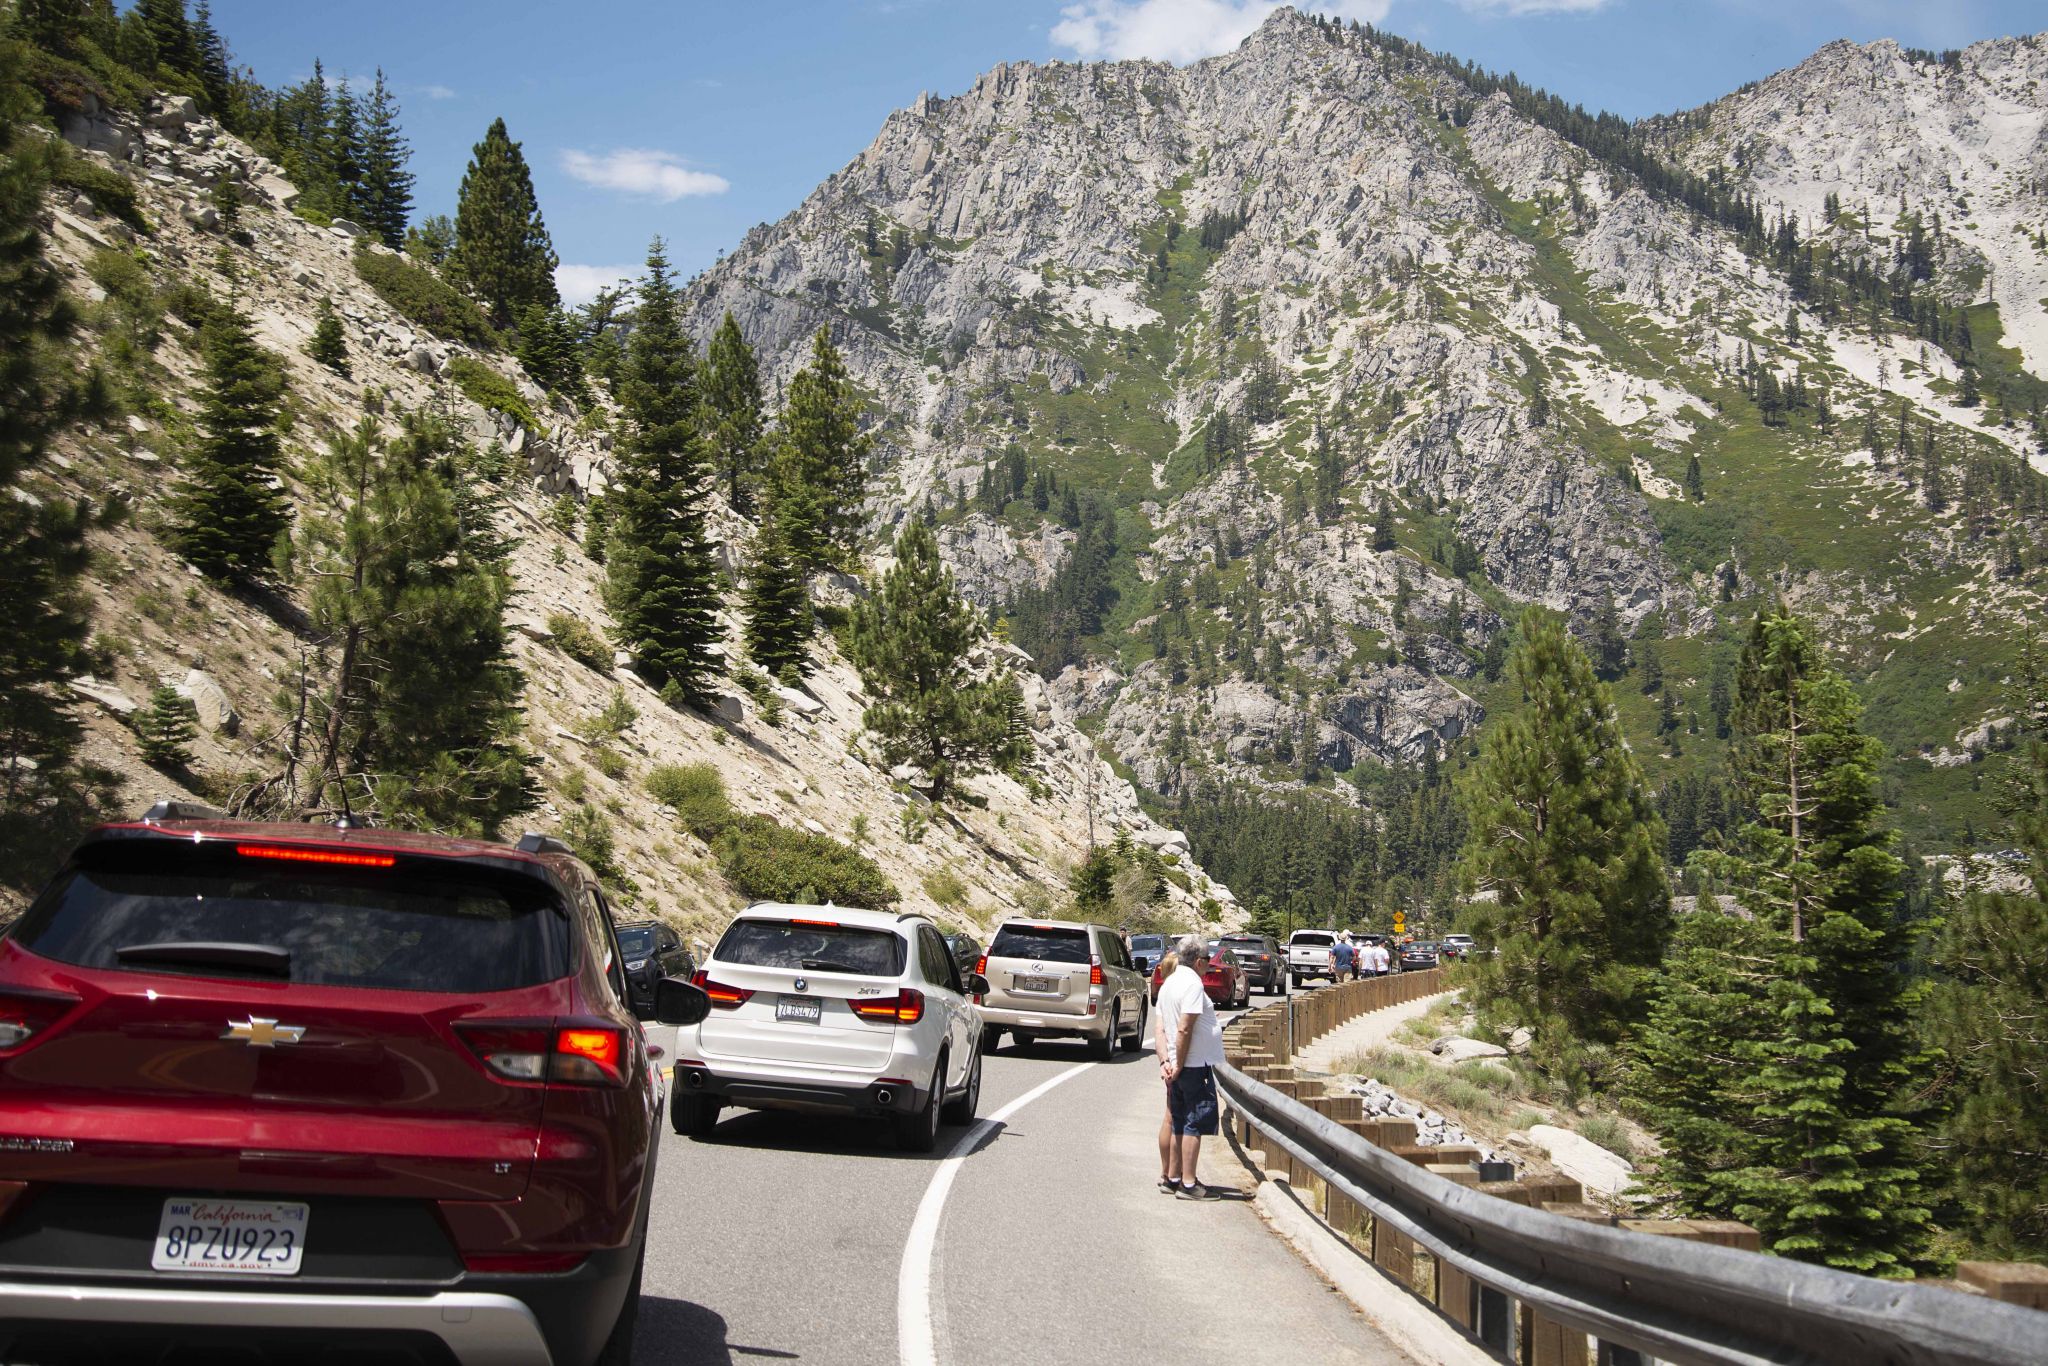 Is sustainable tourism as driver of Tahoe's $5.1B economy?